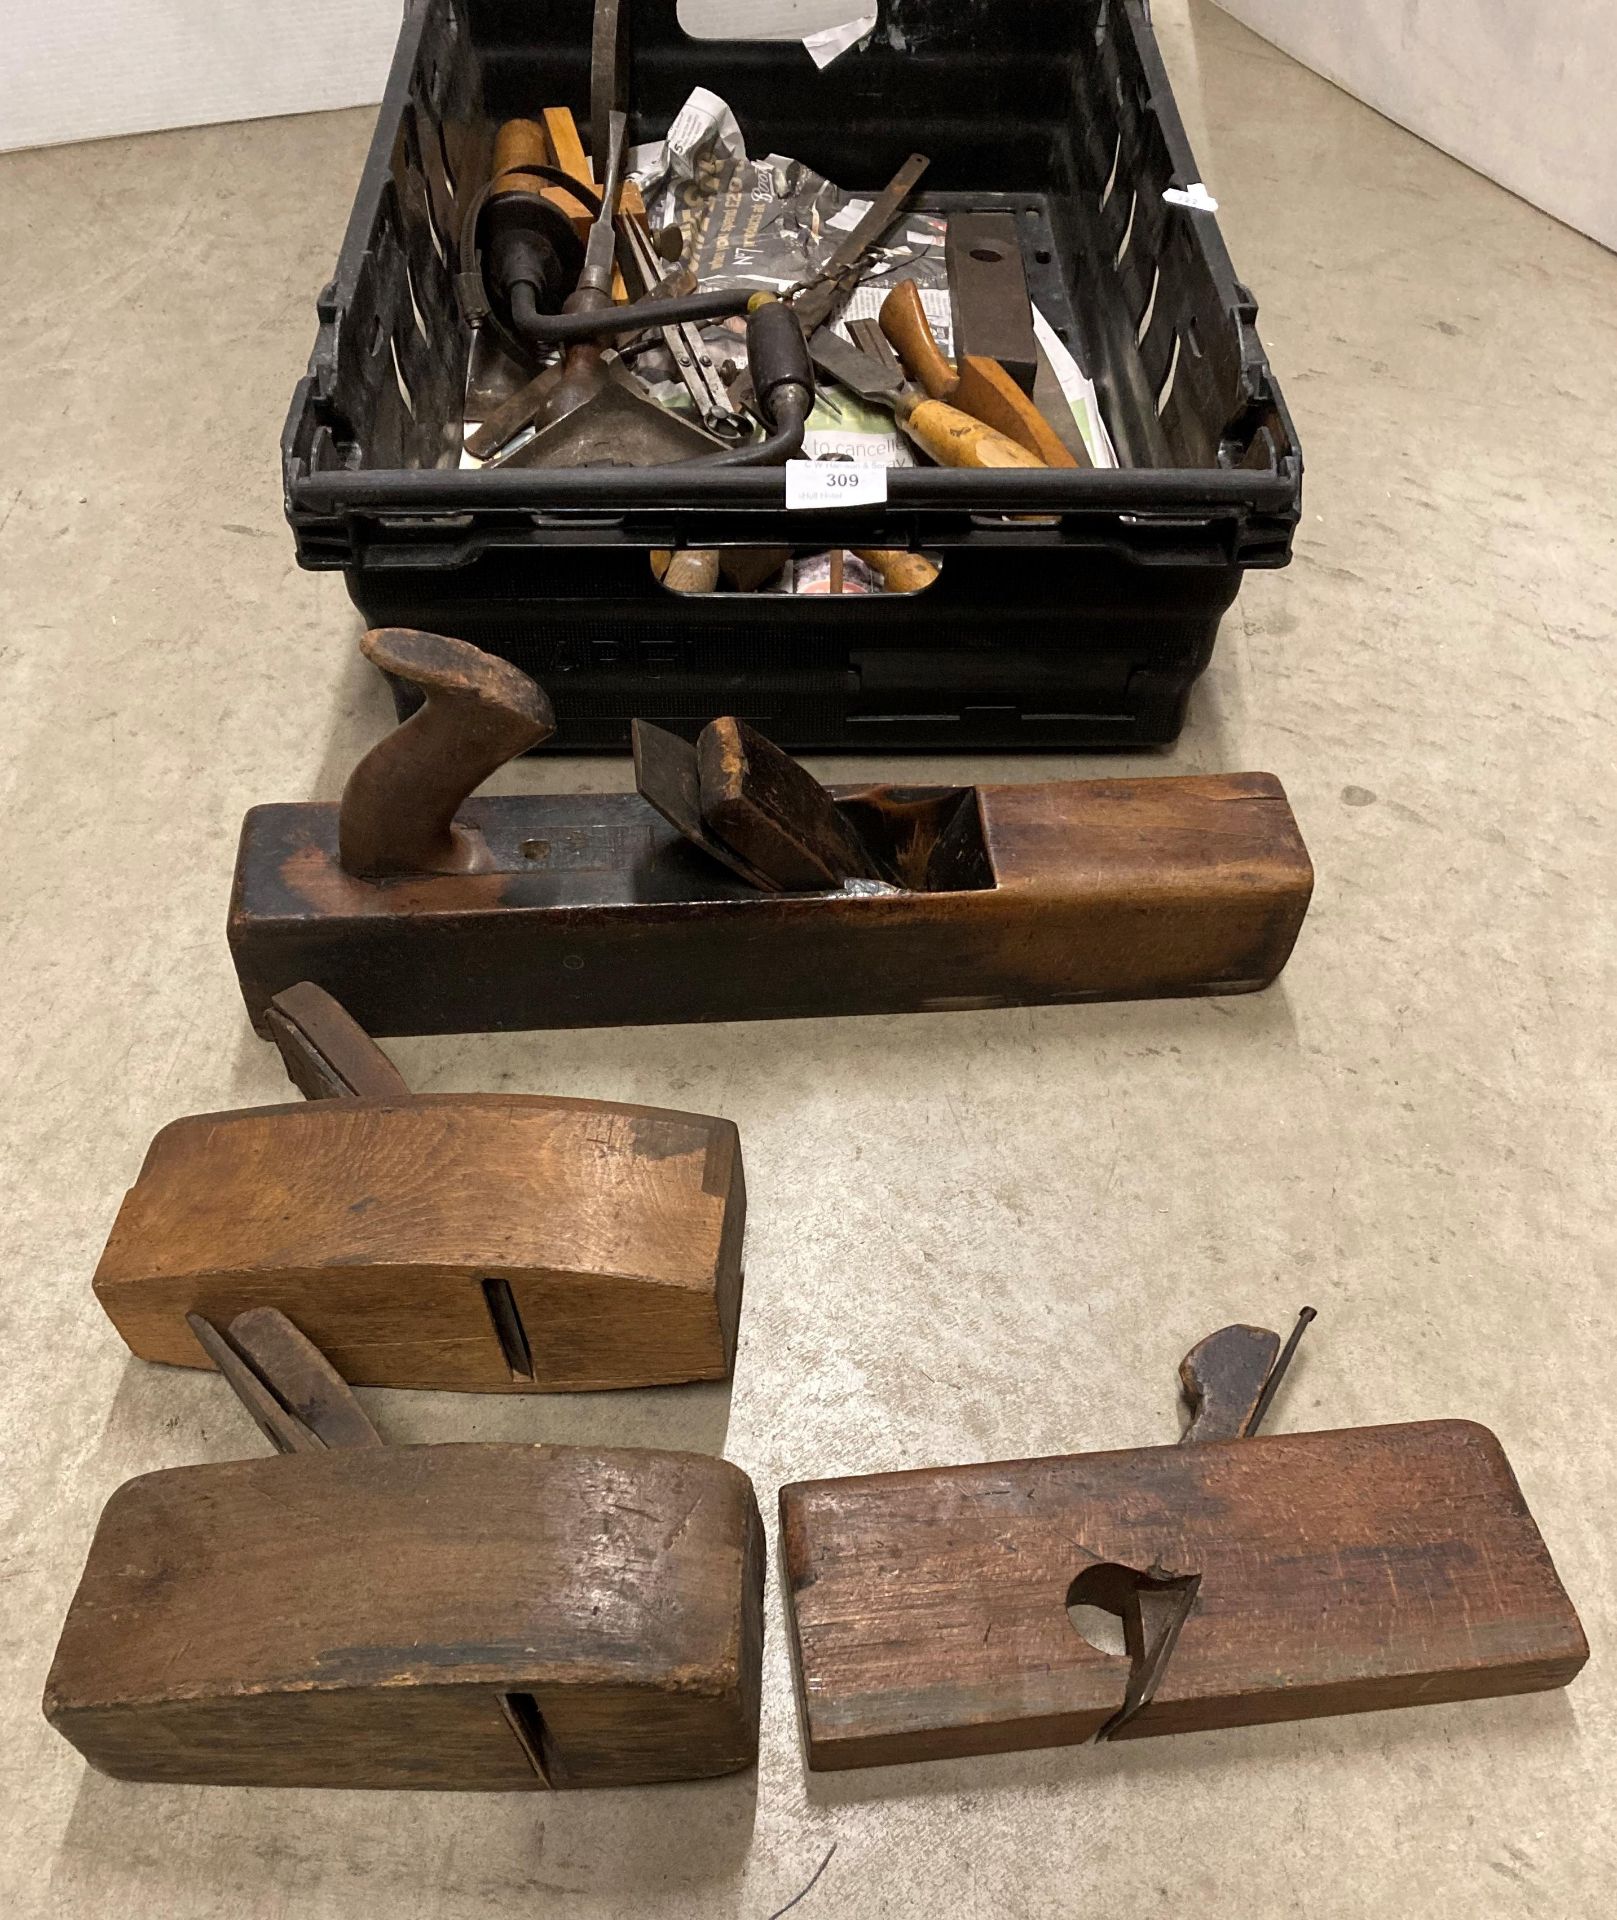 Contents to crate - assorted wood working tools including box planes, bit and brace, chisels, - Bild 2 aus 3